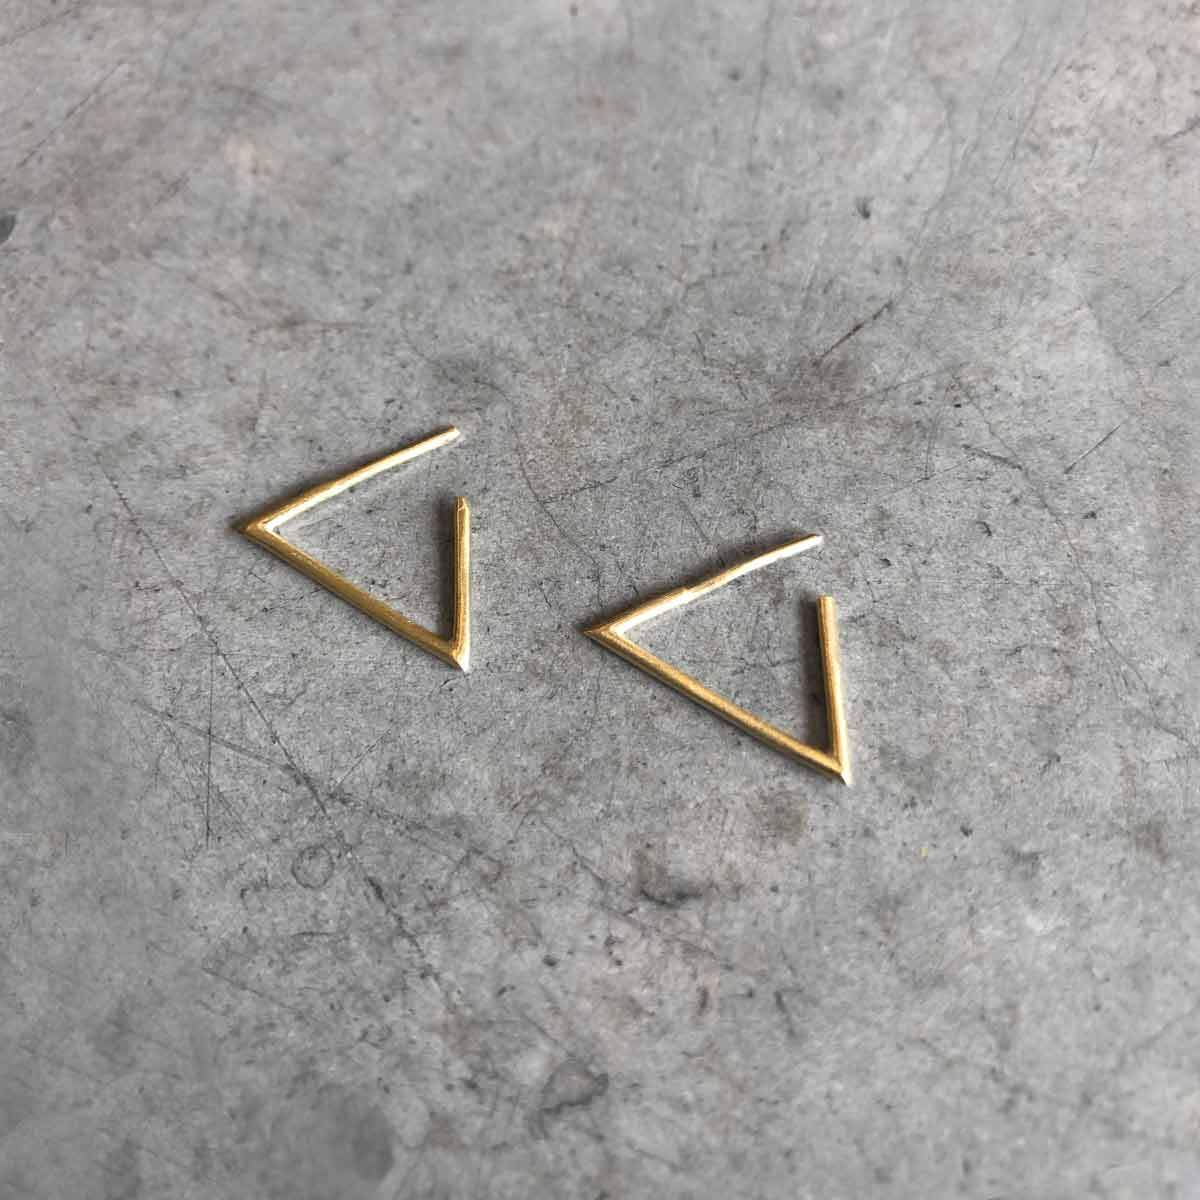 GOLD PLATED Triangle earrings / unisex / עגילי משולש תלוי בציפוי זהב - studio oh design